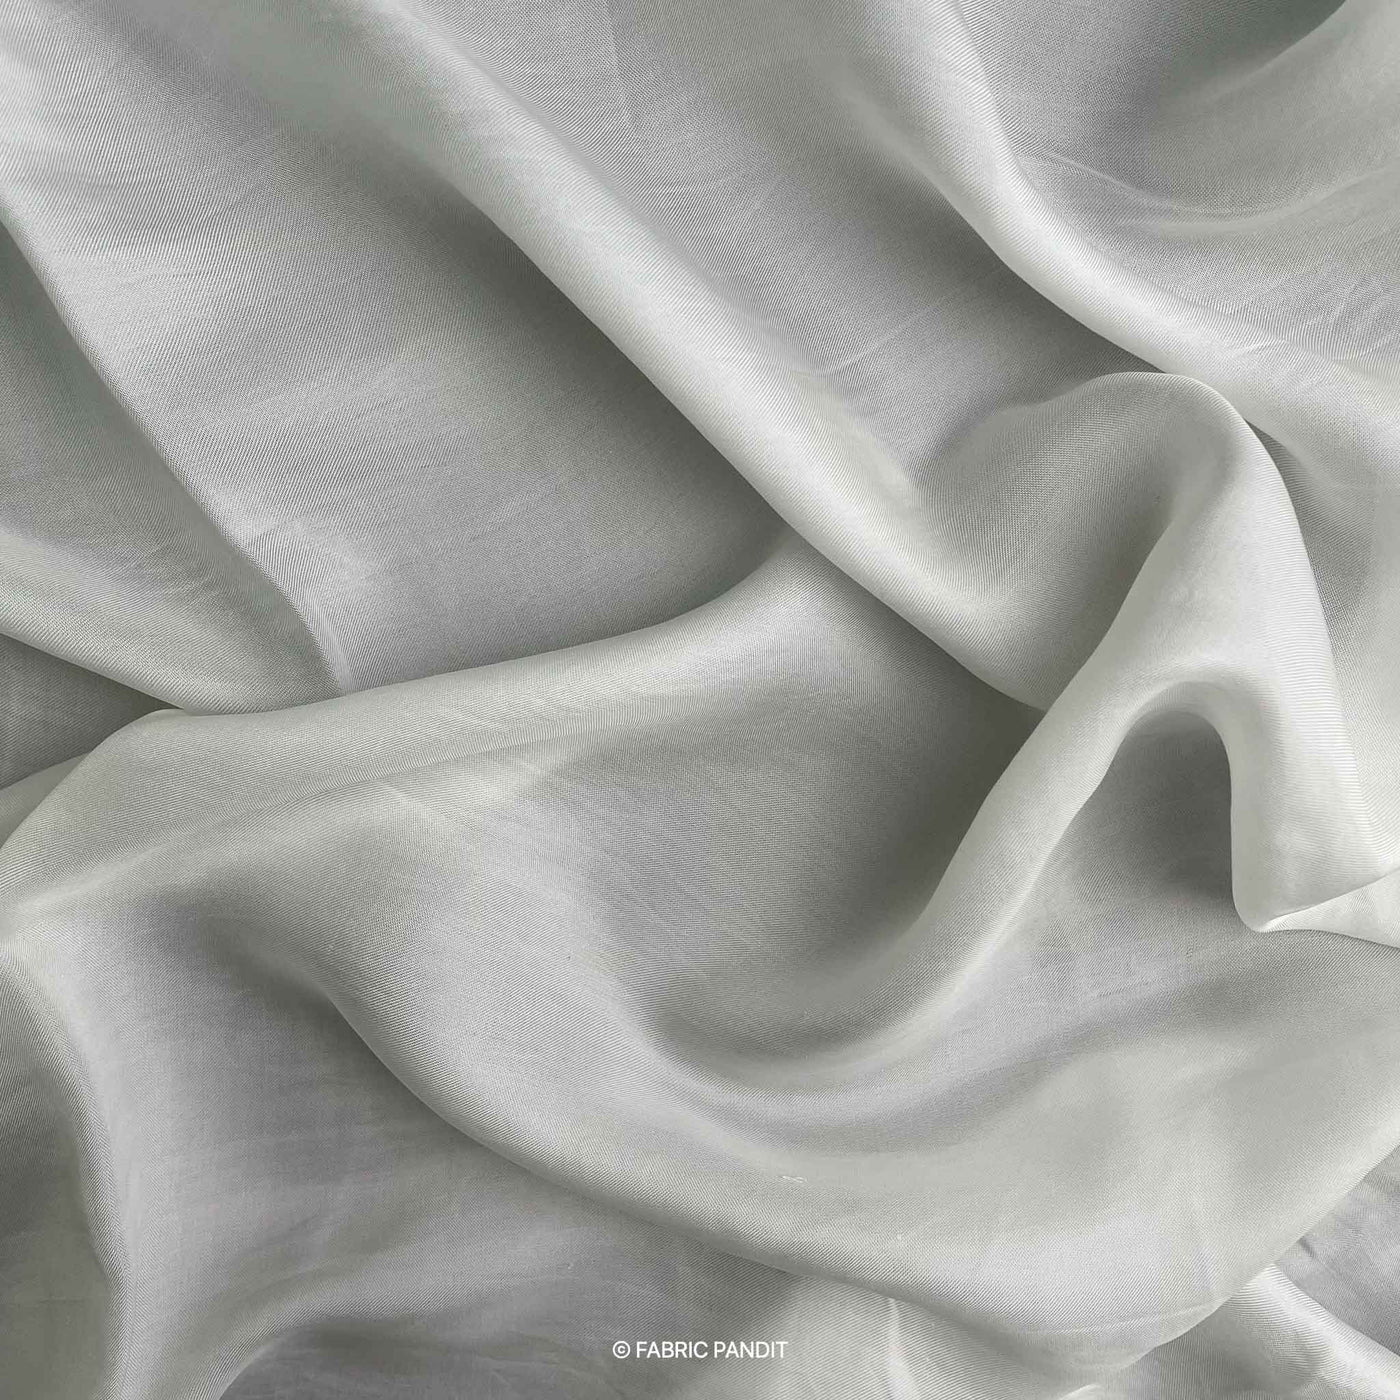 Fabric Pandit White Plain Dyeable Pure Bemberg Satin Fabric (Width 44 inches)